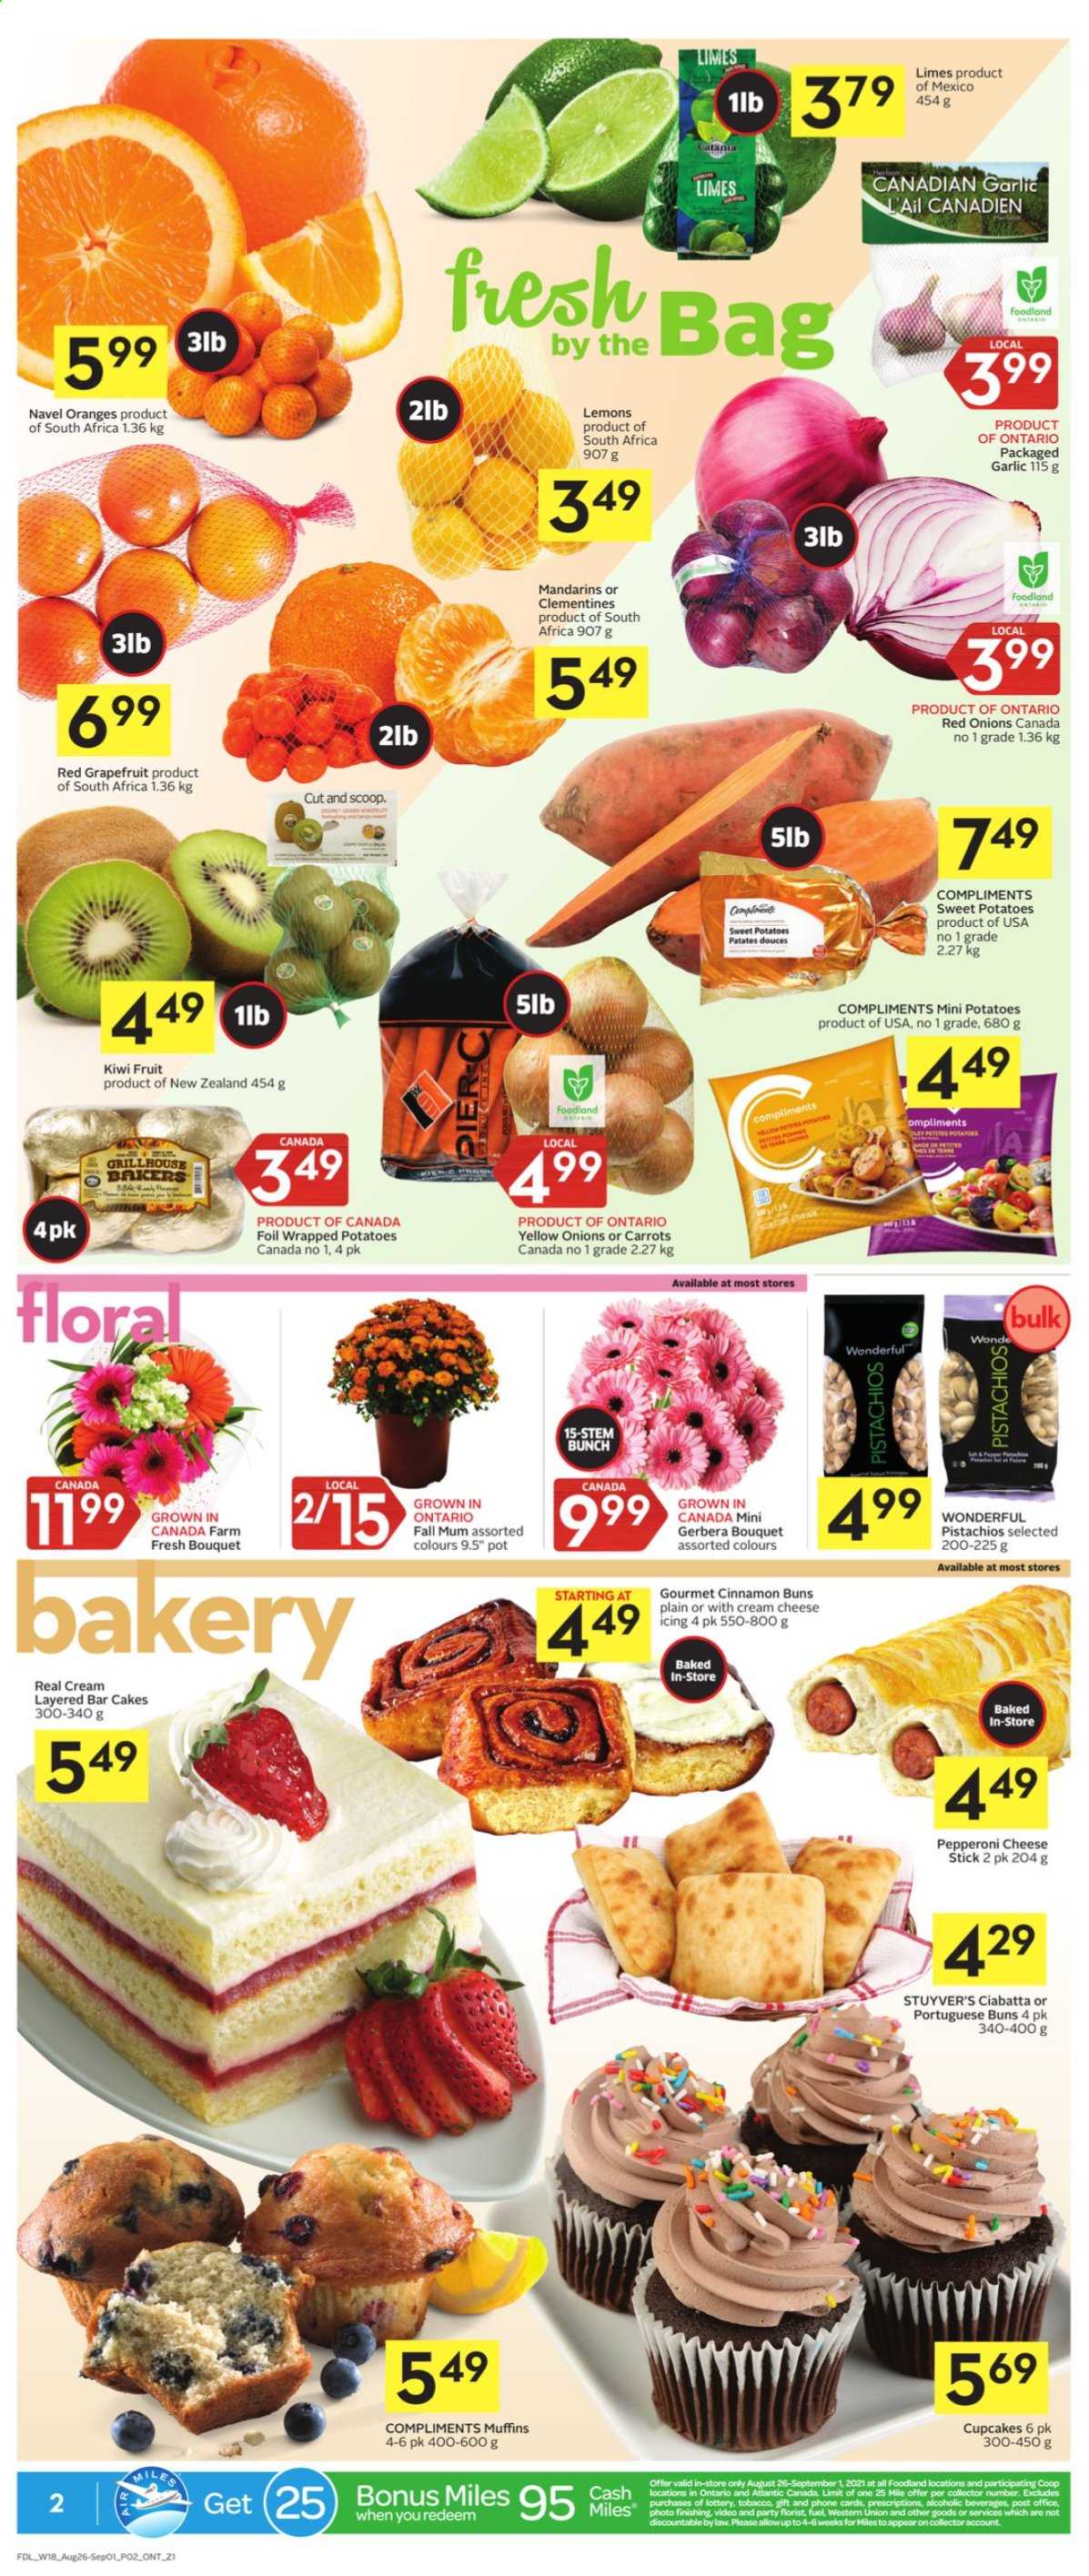 thumbnail - Foodland Flyer - August 26, 2021 - September 01, 2021 - Sales products - cake, buns, cupcake, muffin, carrots, garlic, red onions, sweet potato, potatoes, onion, clementines, grapefruits, limes, mandarines, lemons, navel oranges, pepperoni, cheese, Flora, cinnamon, pistachios, kiwi. Page 2.